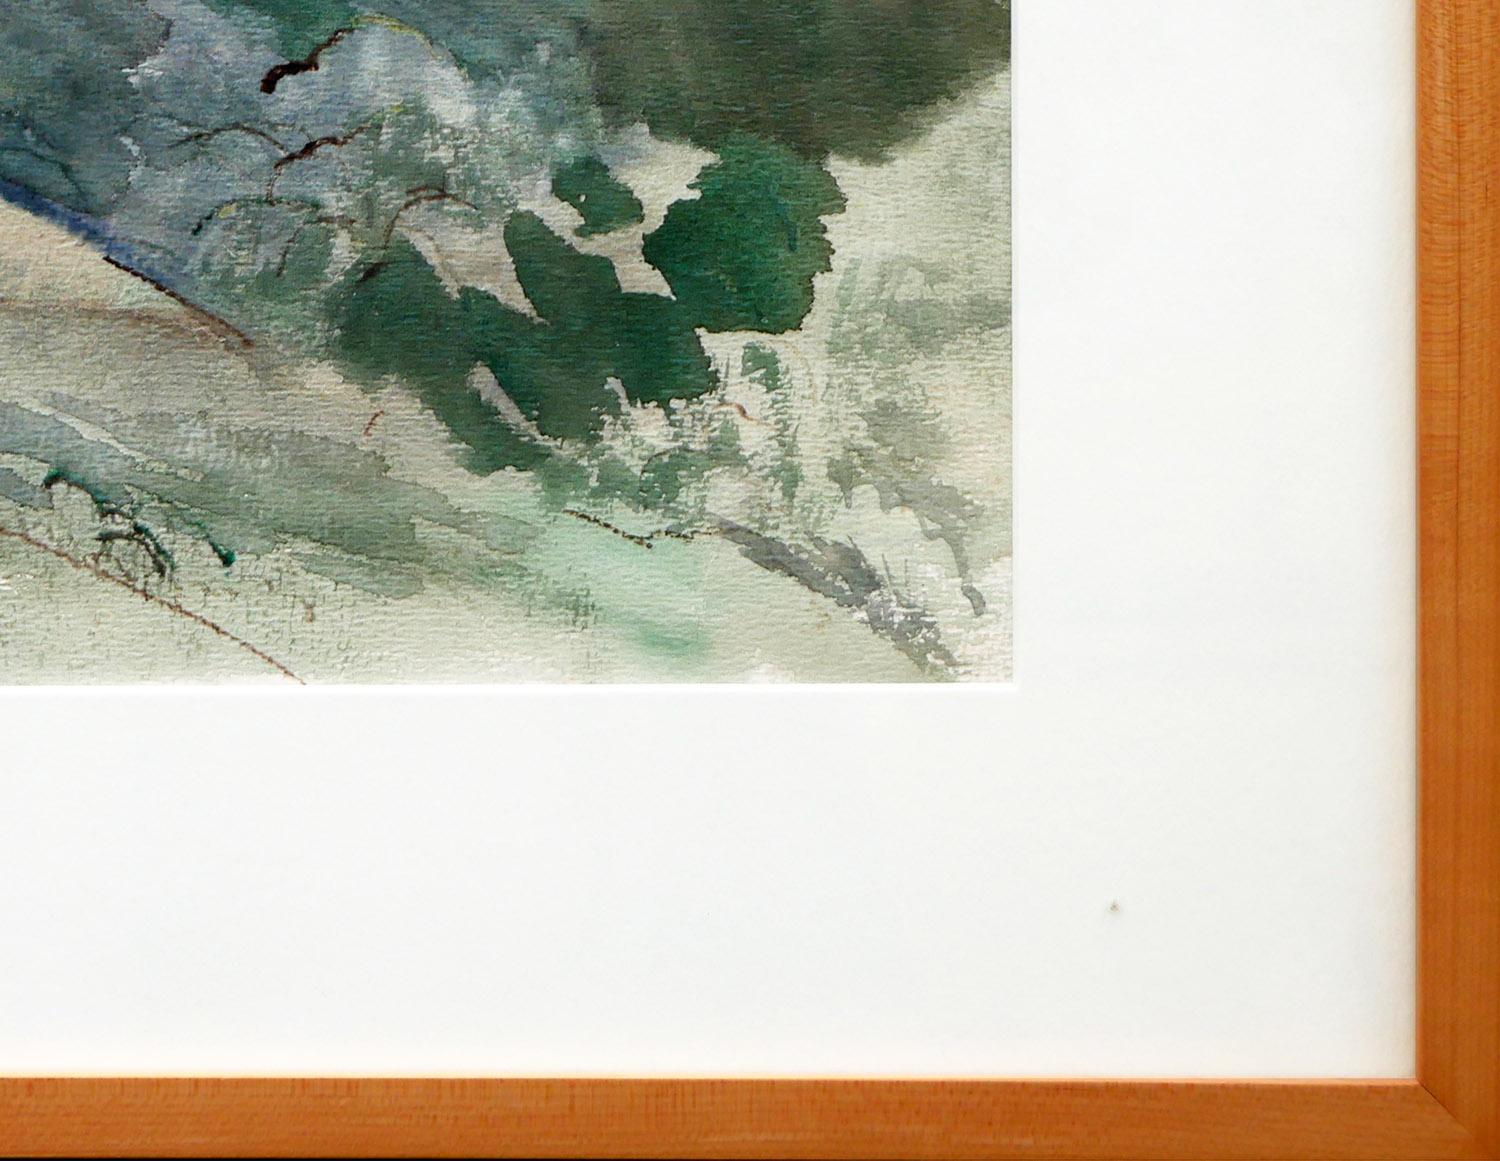 Modern abstract landscape by Houston, TX artist Edsel Cramer. The work features a loosely rendered mountain landscape in muted pastel green tones. Signed in front lower left corner. Currently hung in a light natural wood frame with a white matting.